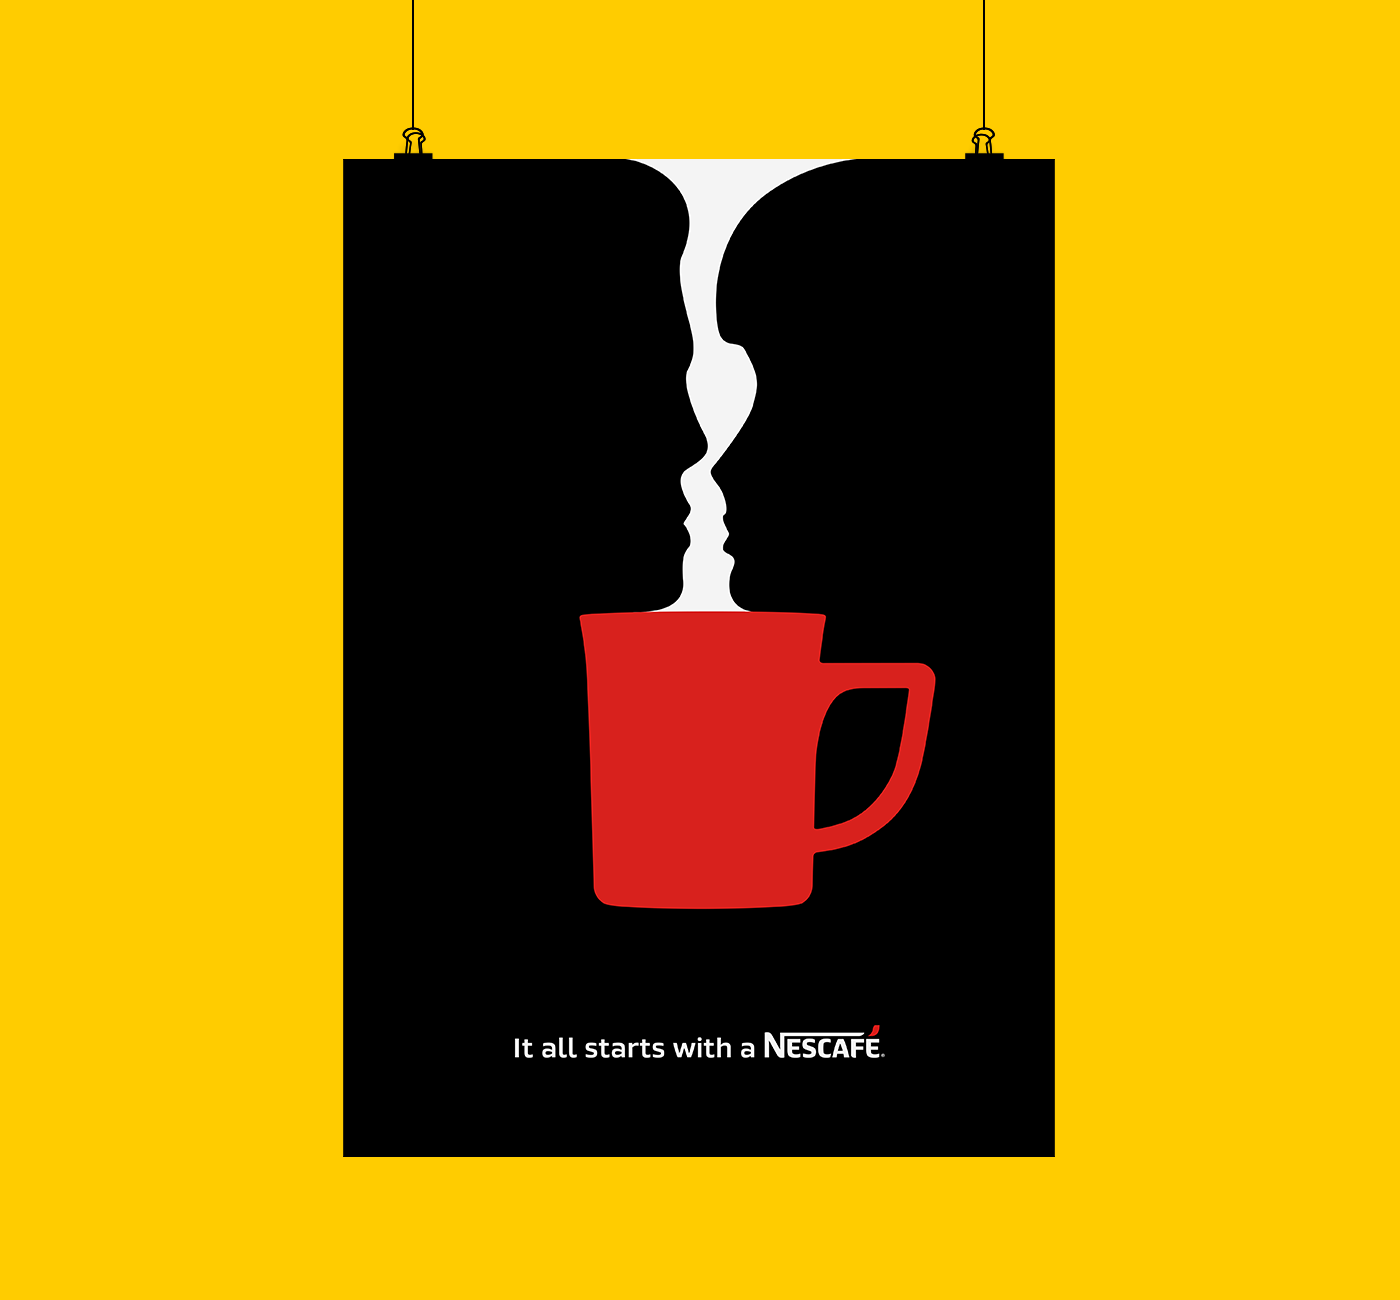 illustration_andre_levy_zhion_vector_flat_minimal_conceptual_nescafe_red_mug_campaign_launch_social_media_content_start_kiss_poster.png